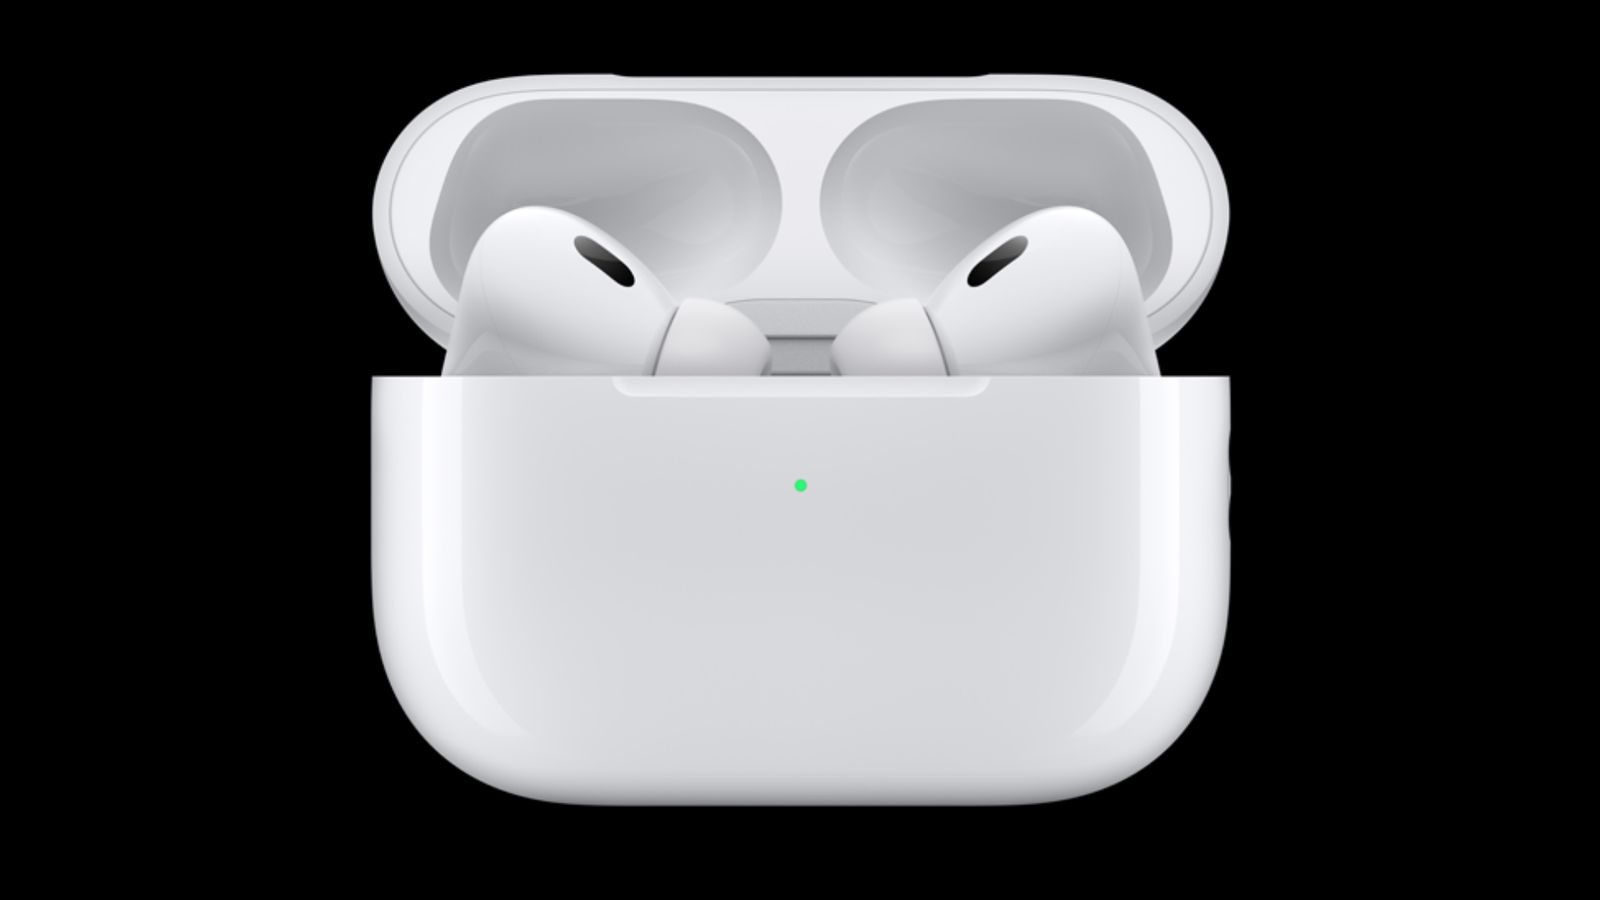 Apple AirPods Pro product image of a pair of white Airpods inside their charging case